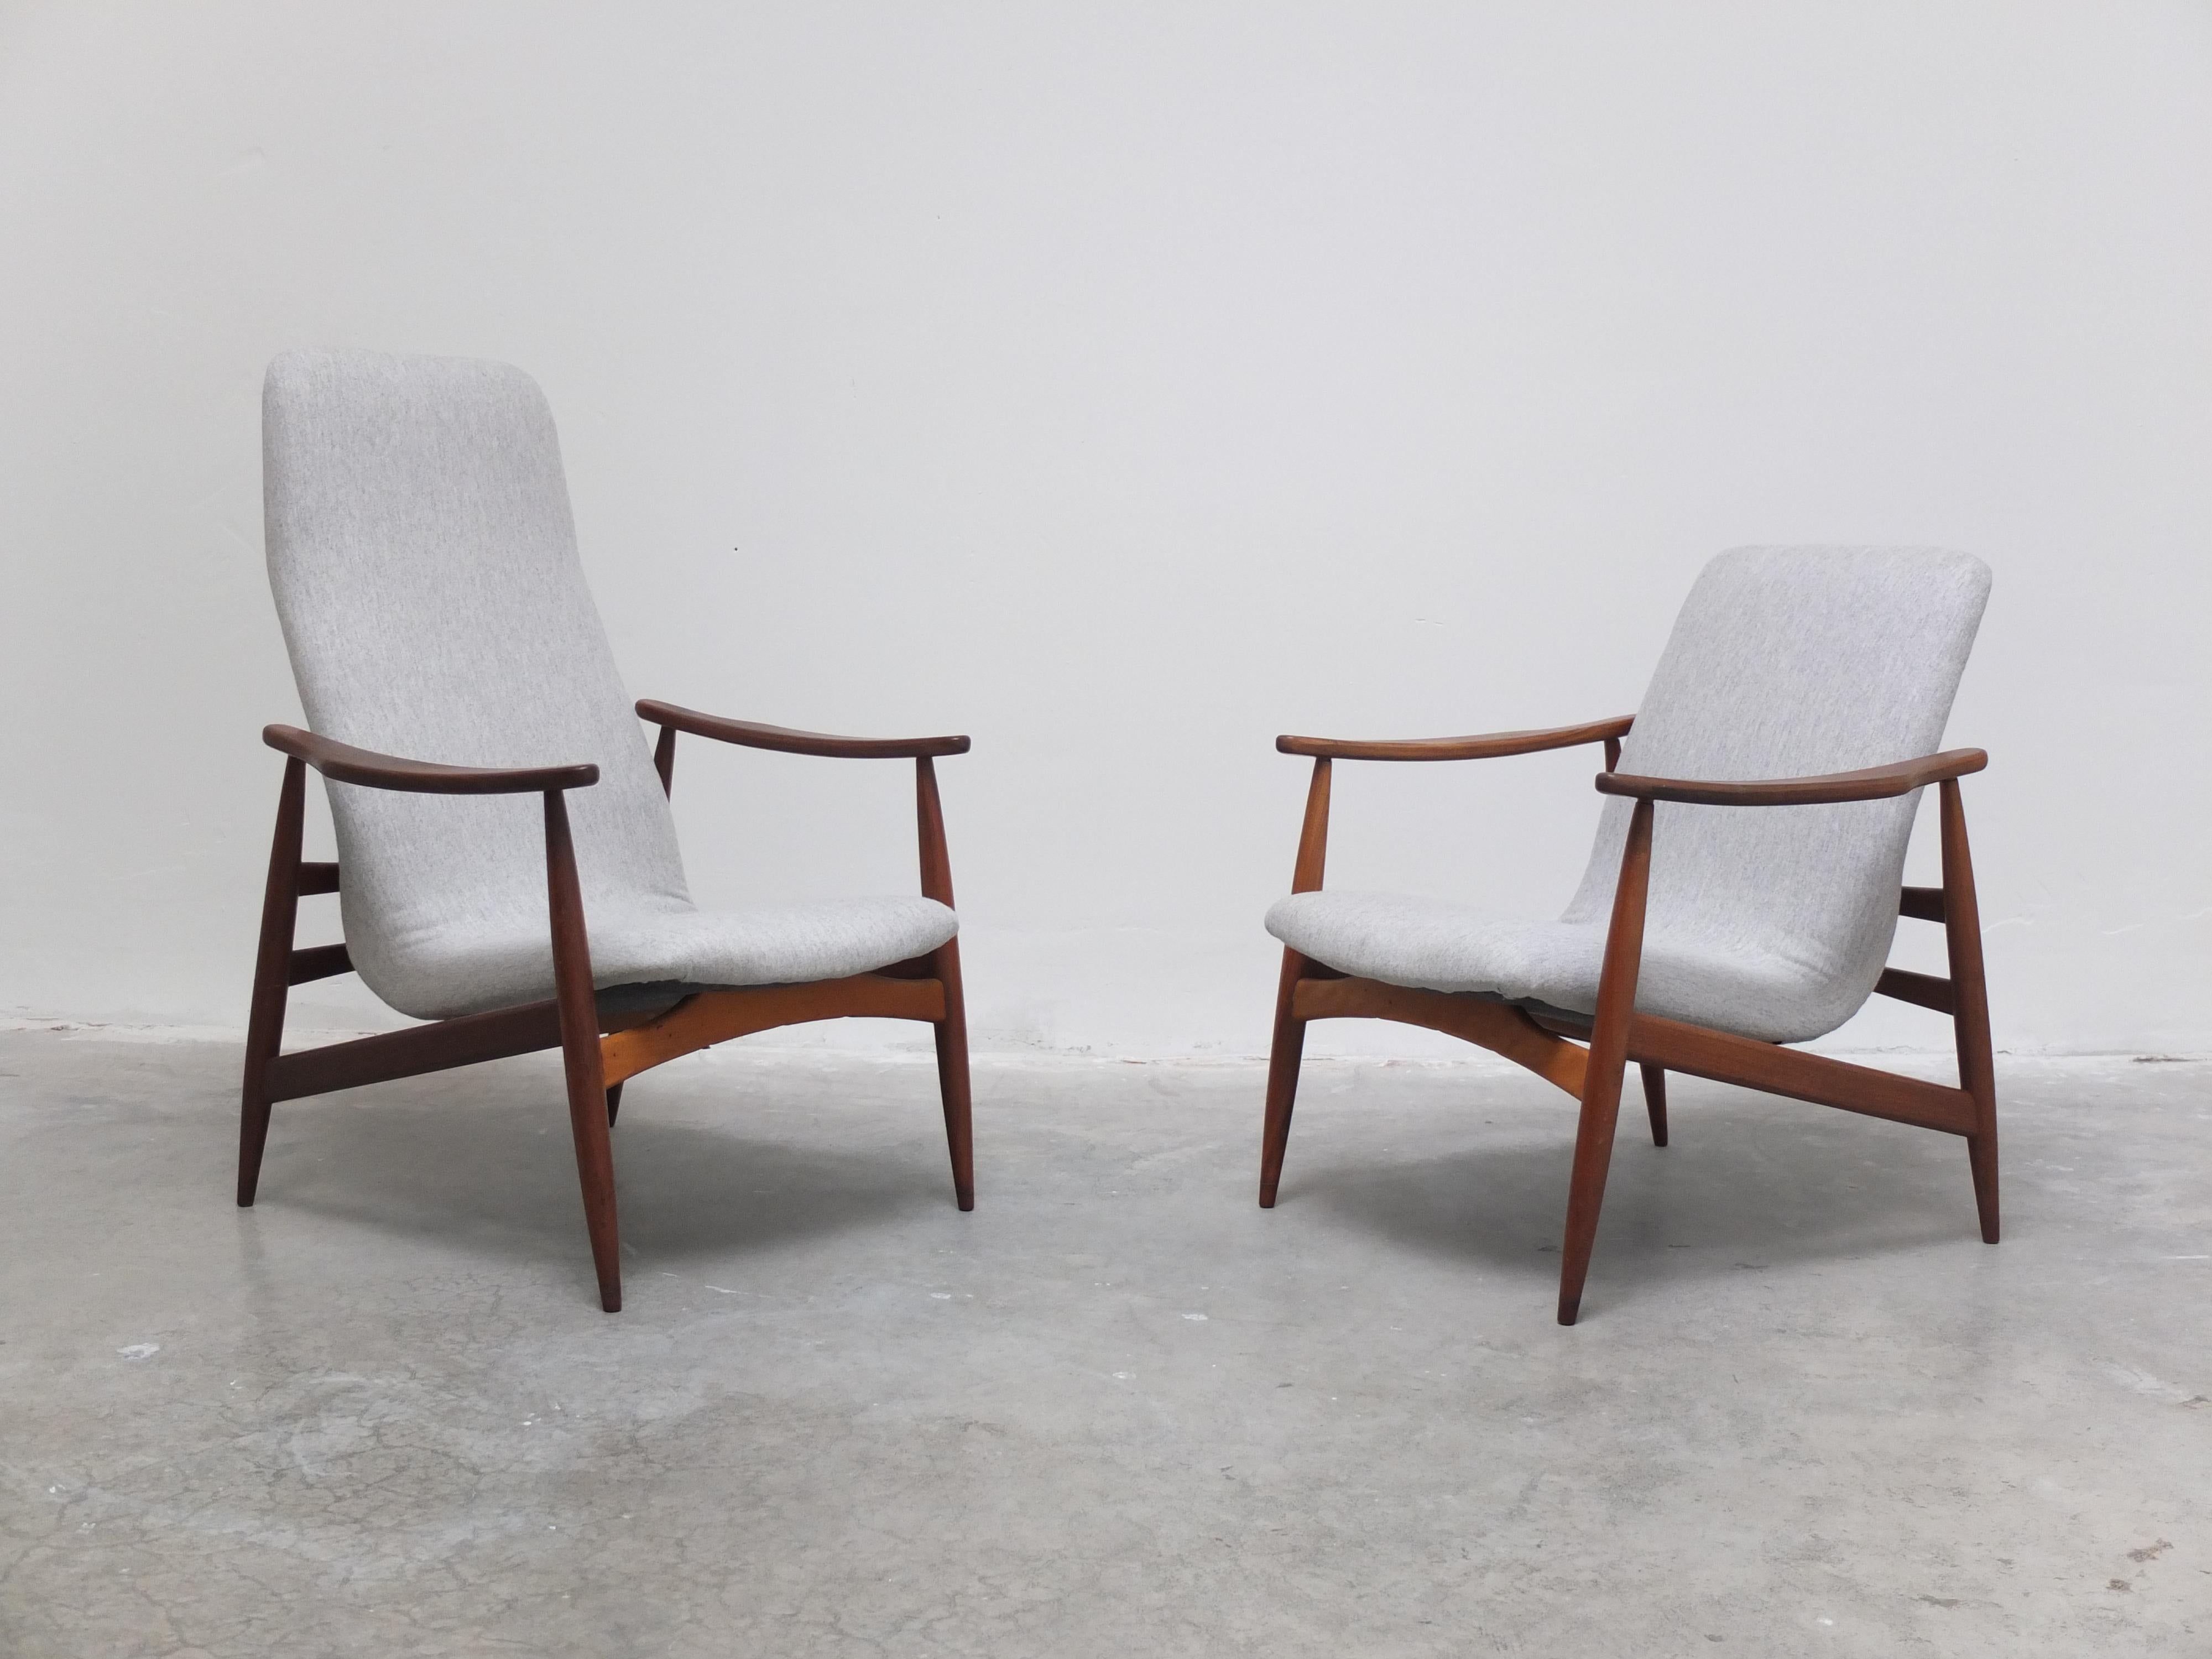 Beautiful pair of lounge chairs consisting of a his and hers model with a taller and lower backrest. Probably designed by Louis Van Teeffelen for Wébé but not documented so quite a rare pair. They have organic teak frames with a nice double joint on